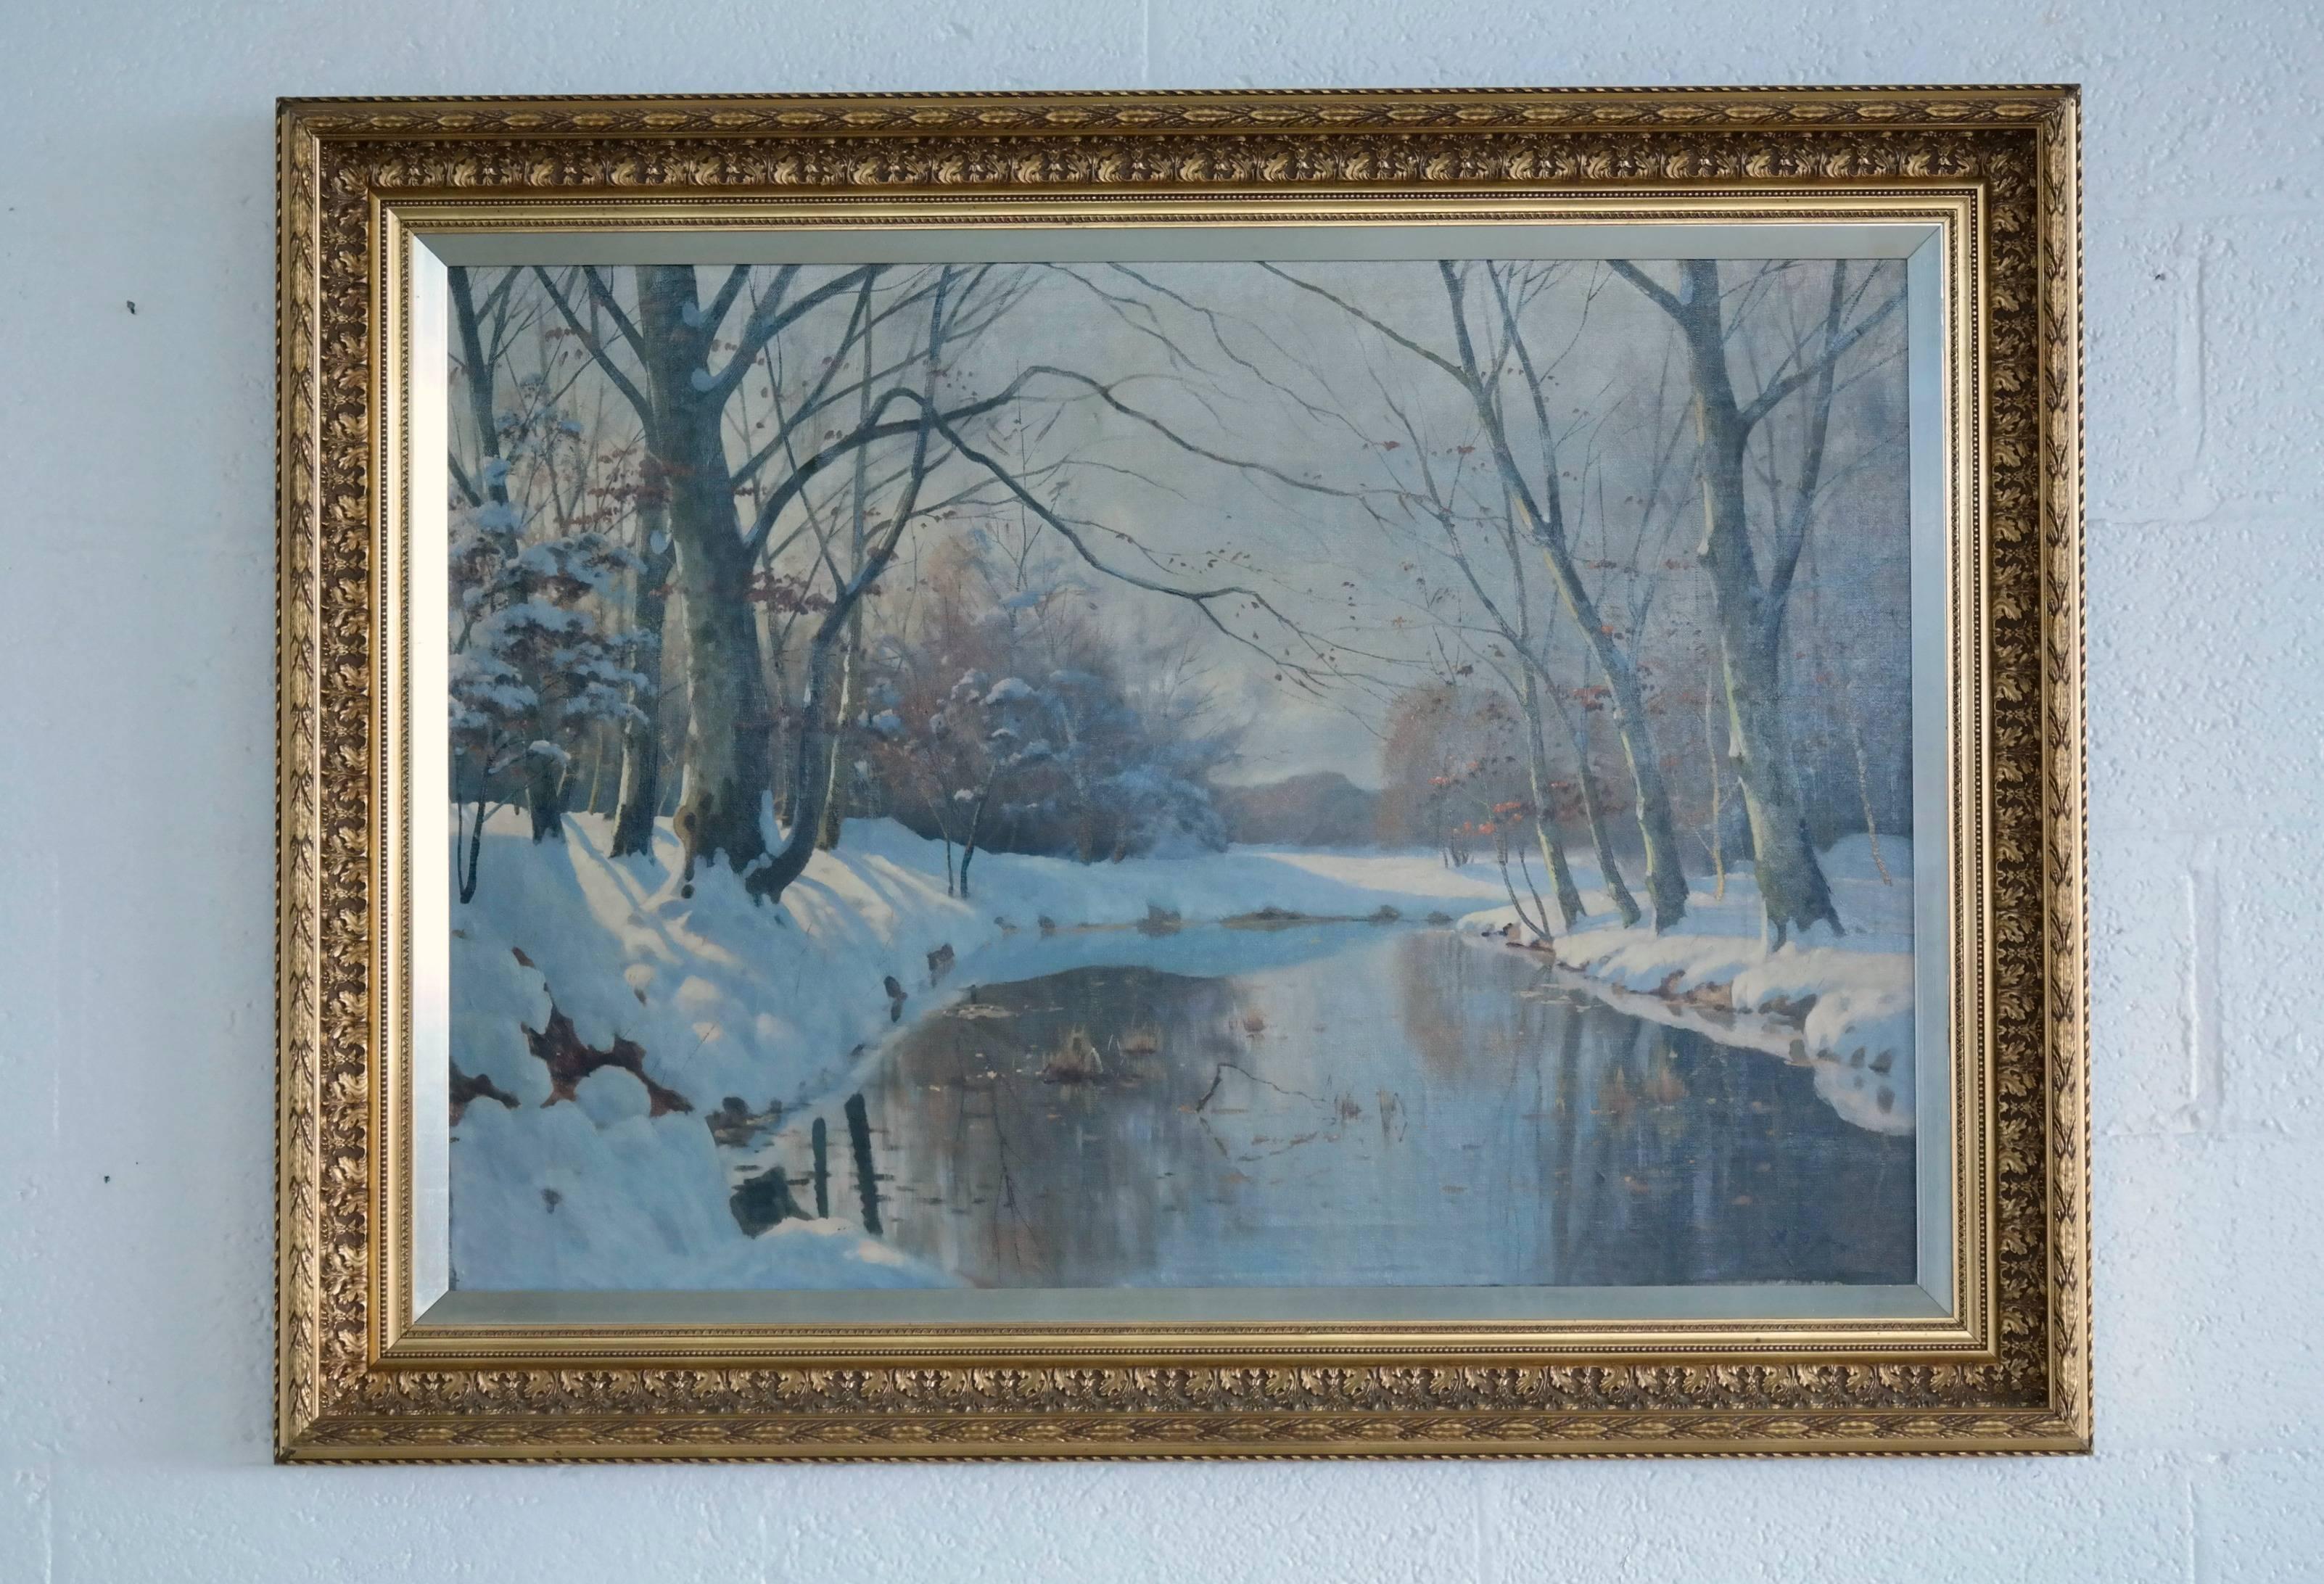 Original oil painting on canvas signed H. Wentzel from the first part of the 20th century by Harald Wentzel born 1897 was a listed Danish artist, well-known for his beautiful landscape paintings.